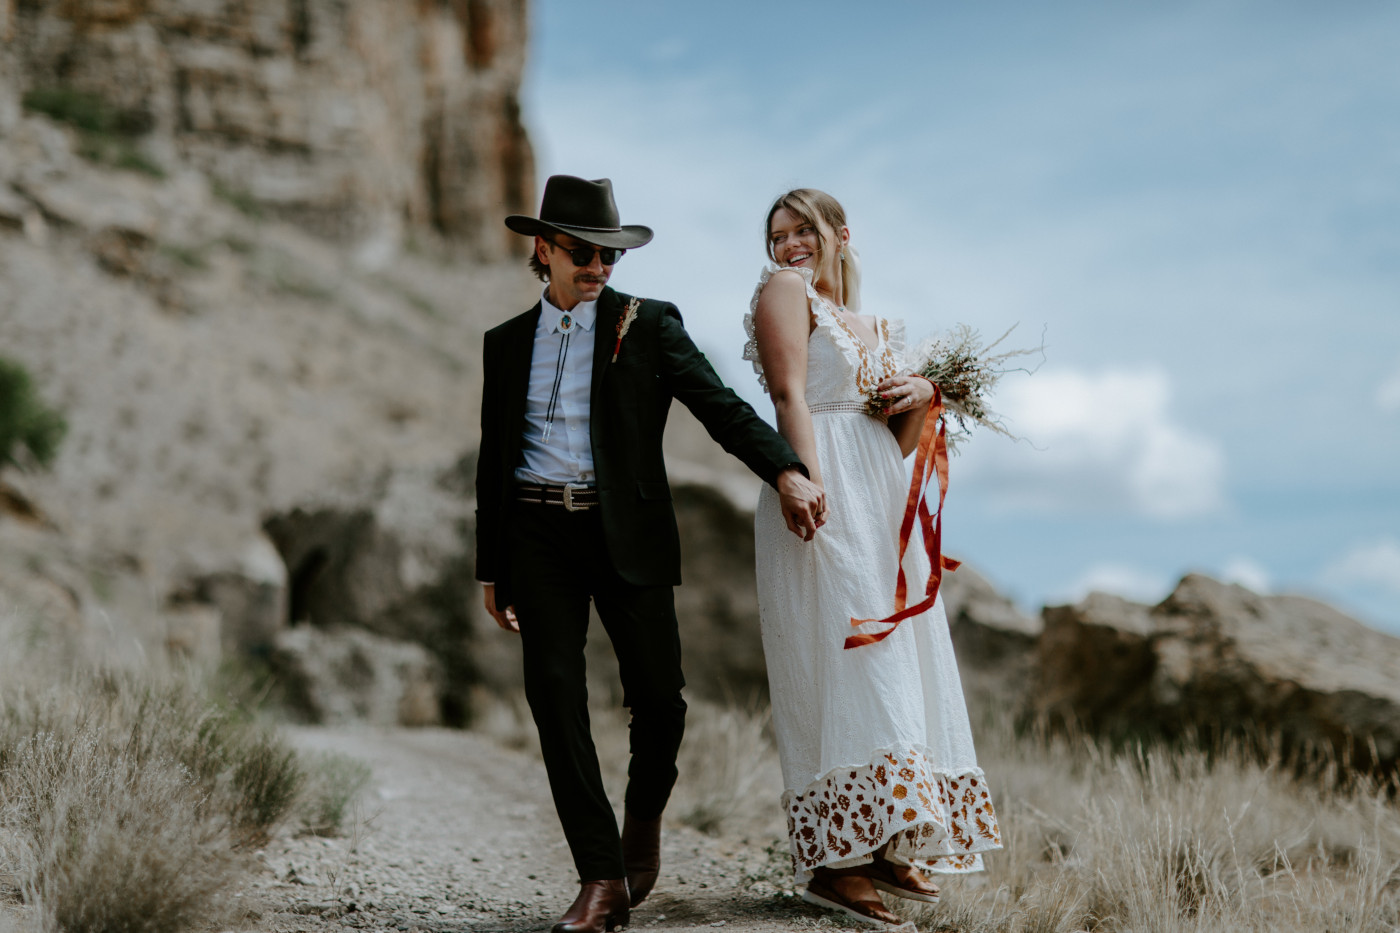 Emily and Greyson hold hands as they walk along a trail. Elopement photography in the Central Oregon desert by Sienna Plus Josh.